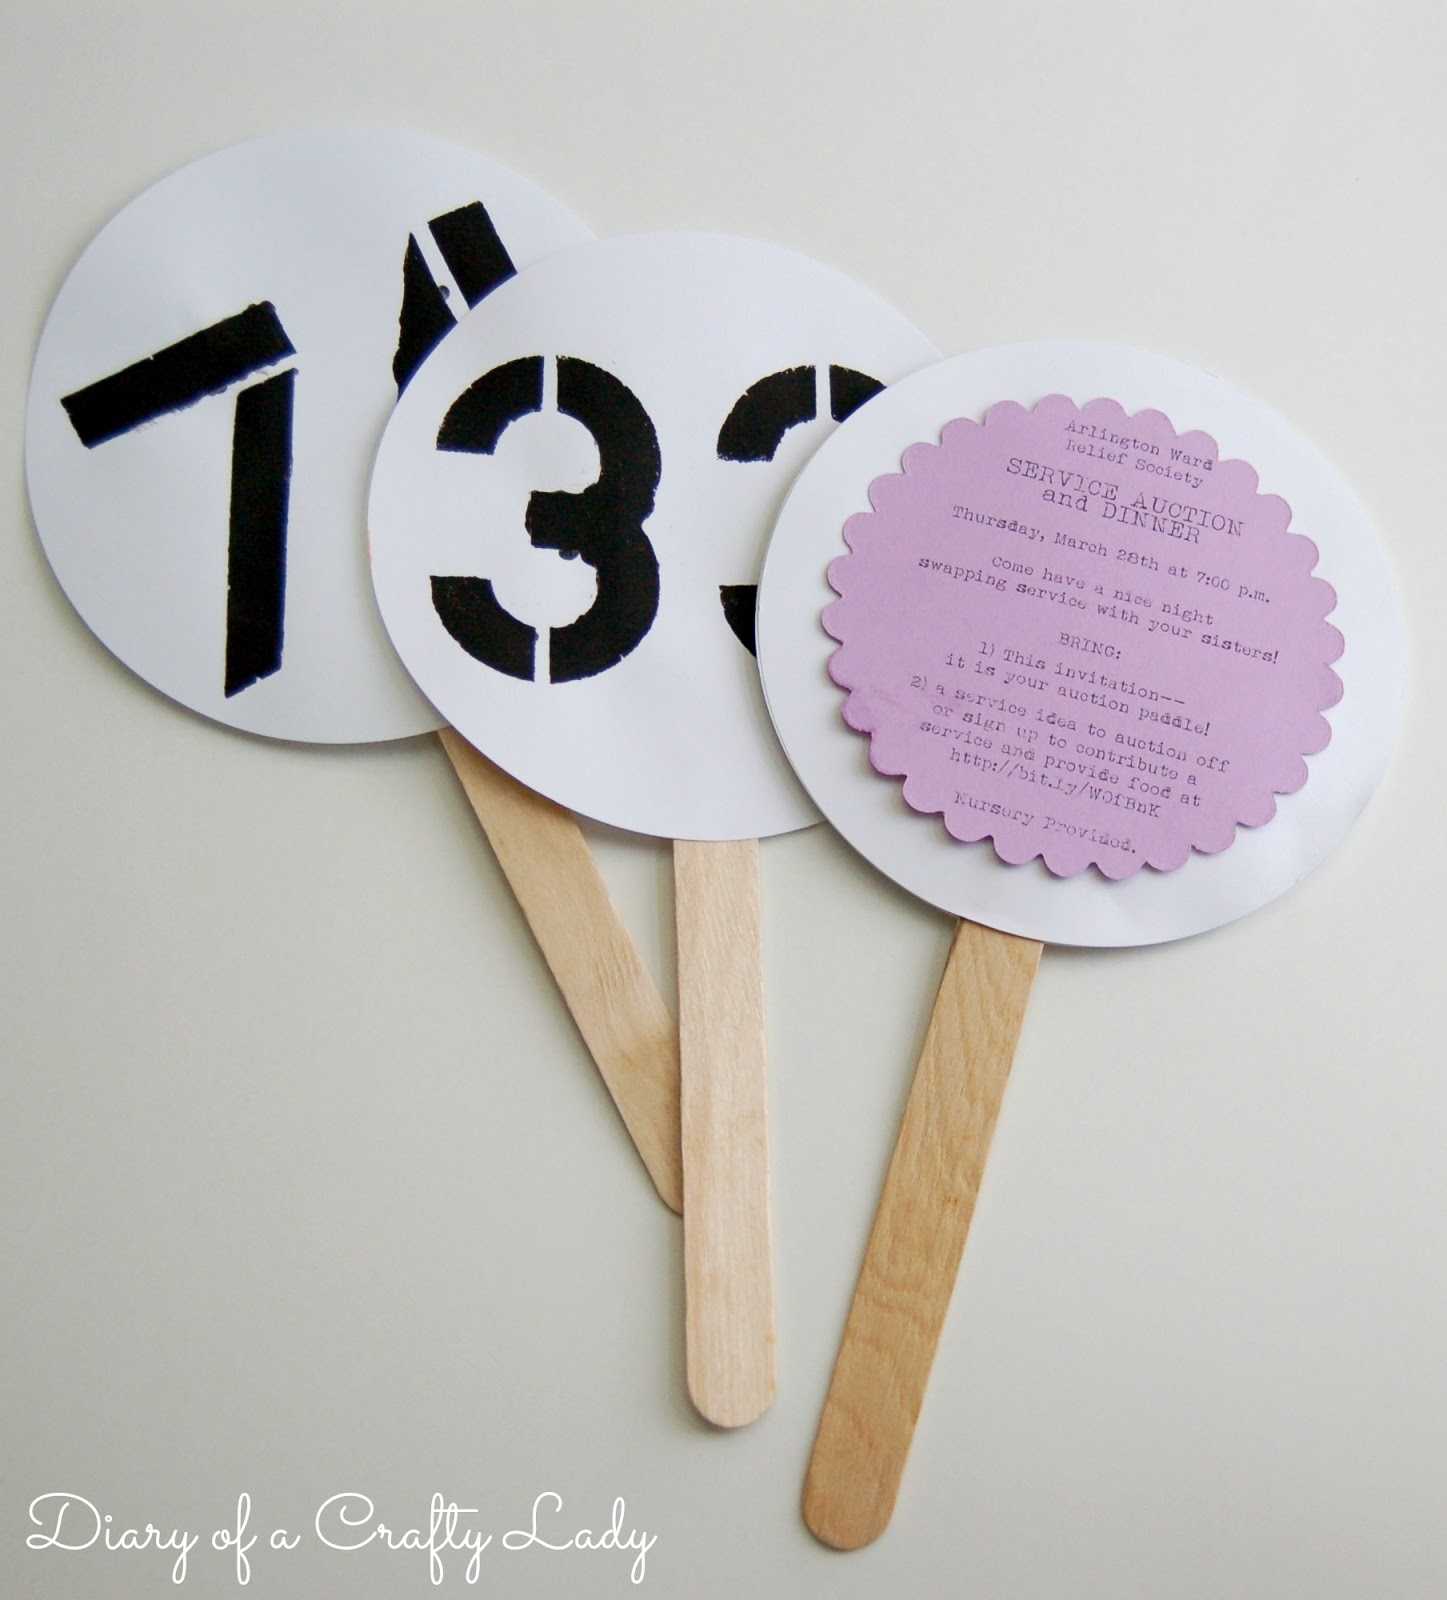 Free Bid Paddle Cliparts, Download Free Clip Art, Free Clip Throughout Auction Bid Cards Template